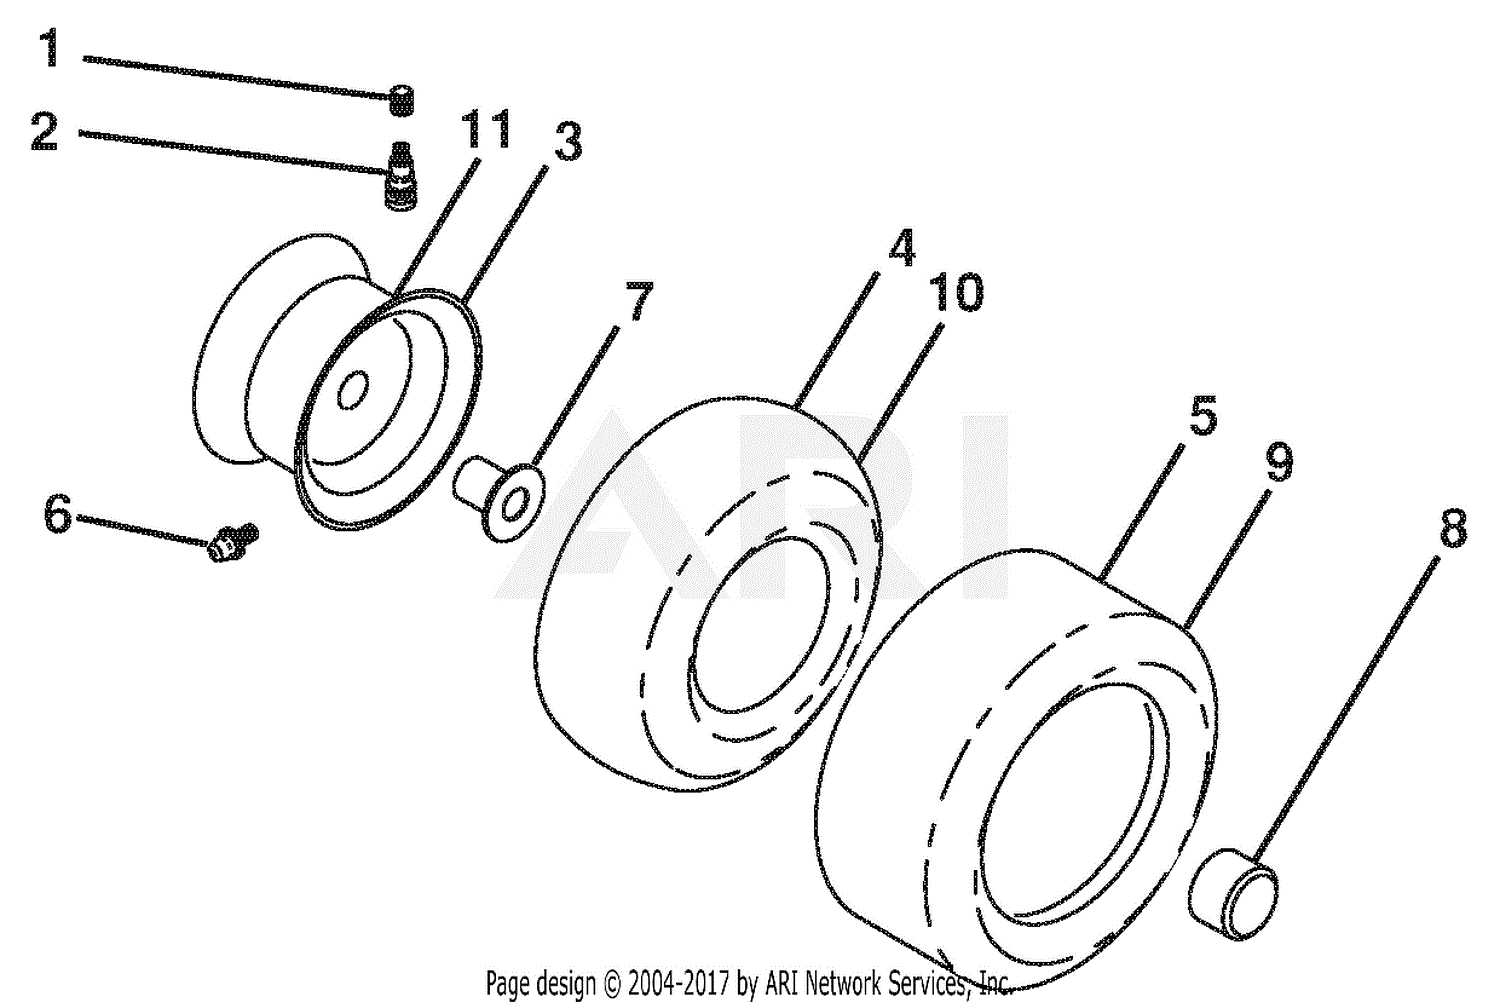 Ariens 936056 960460023 00 46 Hydro Tractor Parts Diagram For Wheels